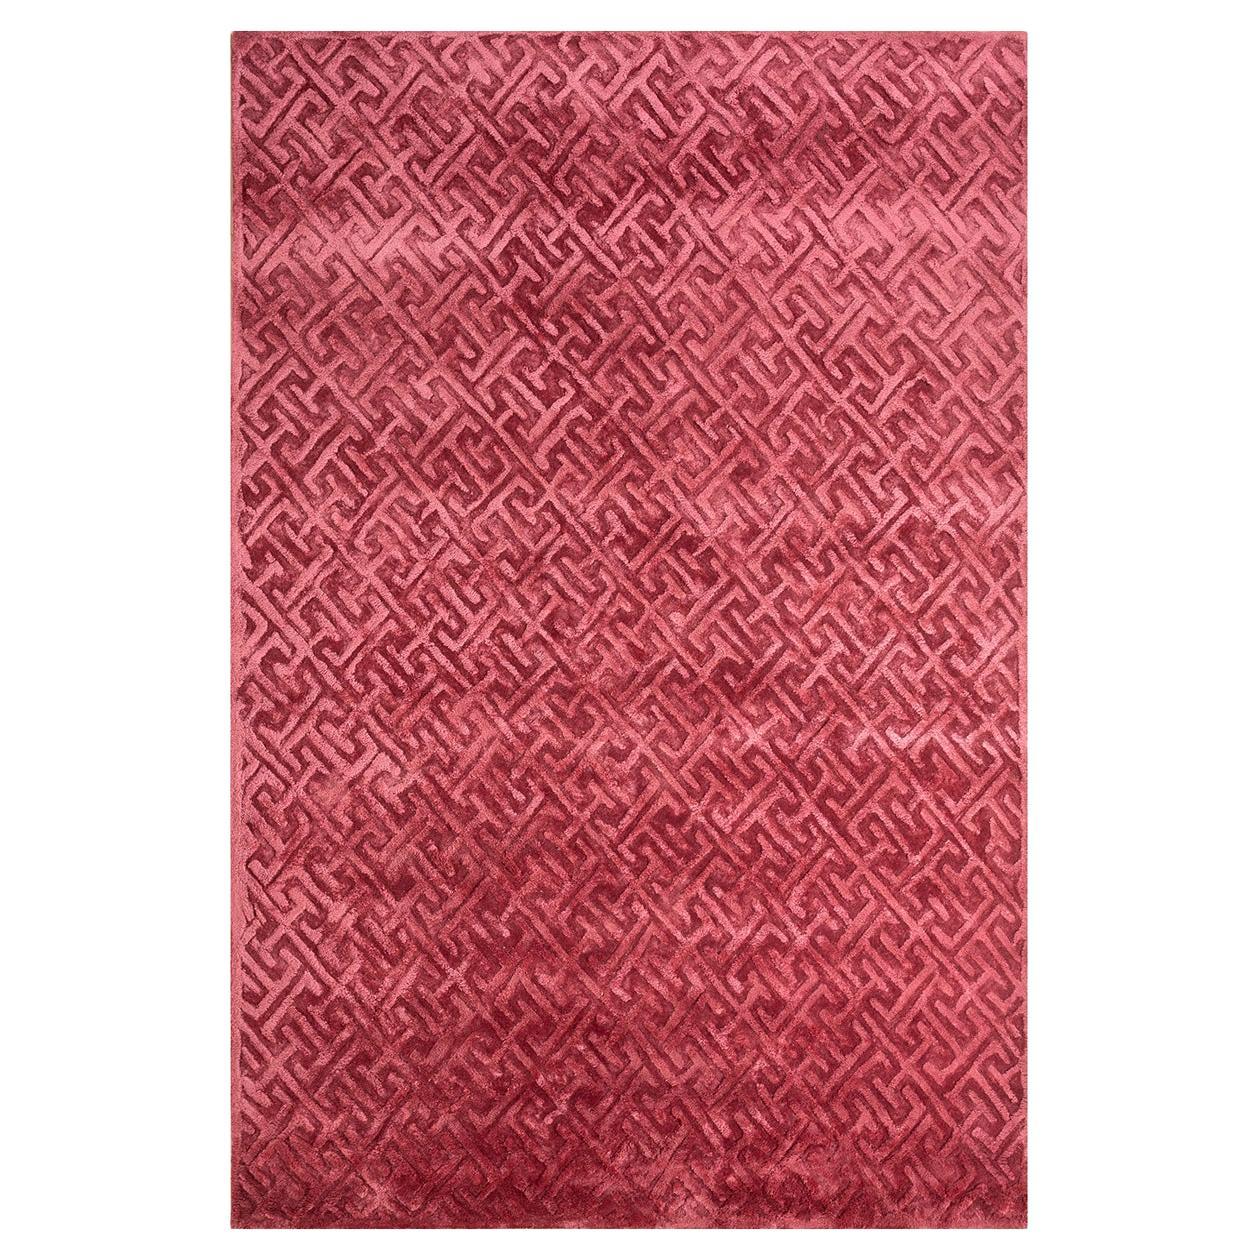 Angled Rug by Rural Weavers, Tufted, Wool, Viscose, 180x270cm